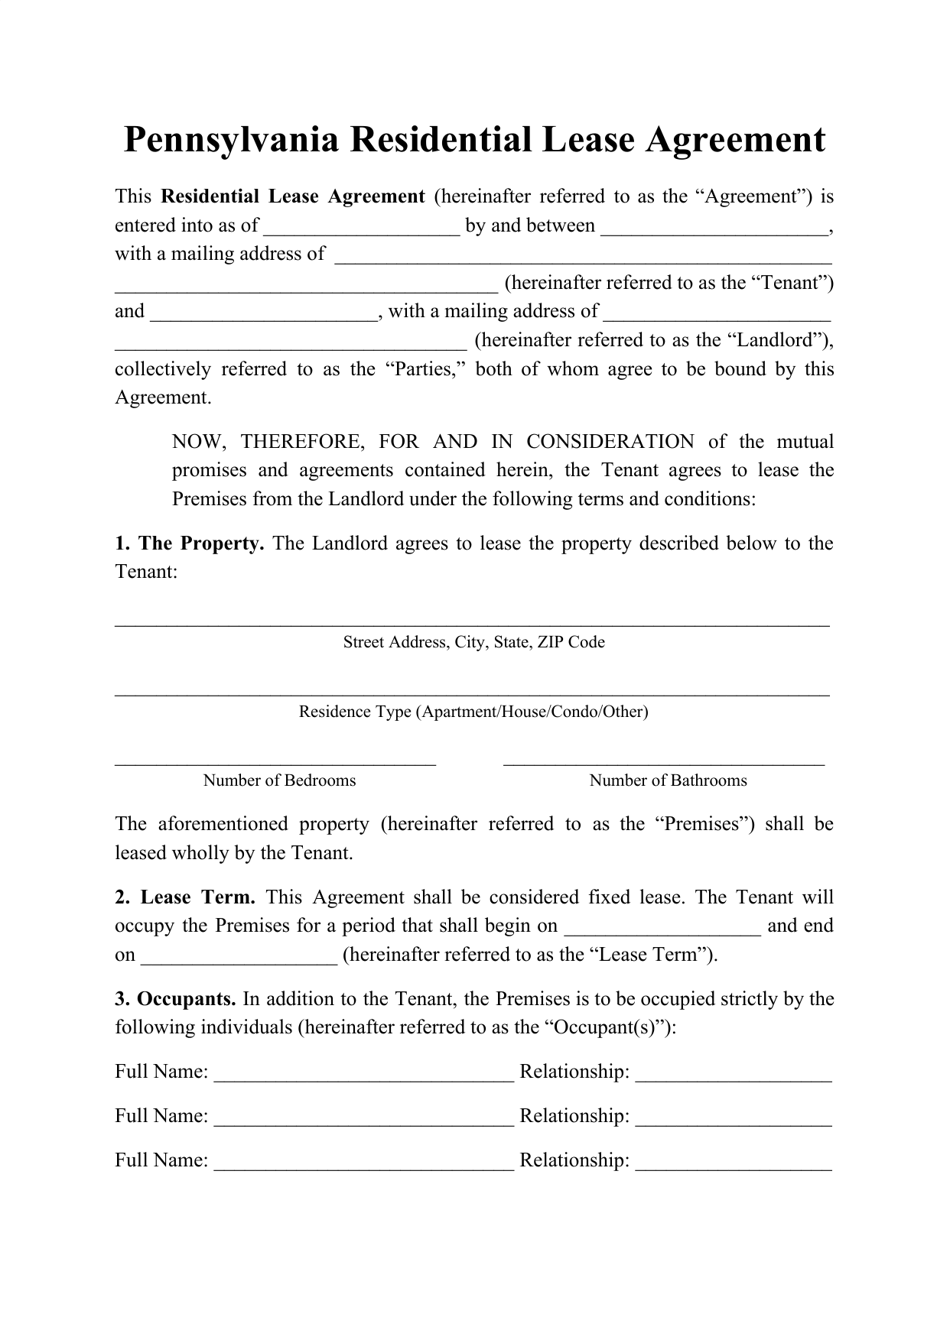 Residential Lease Agreement Template - Pennsylvania, Page 1